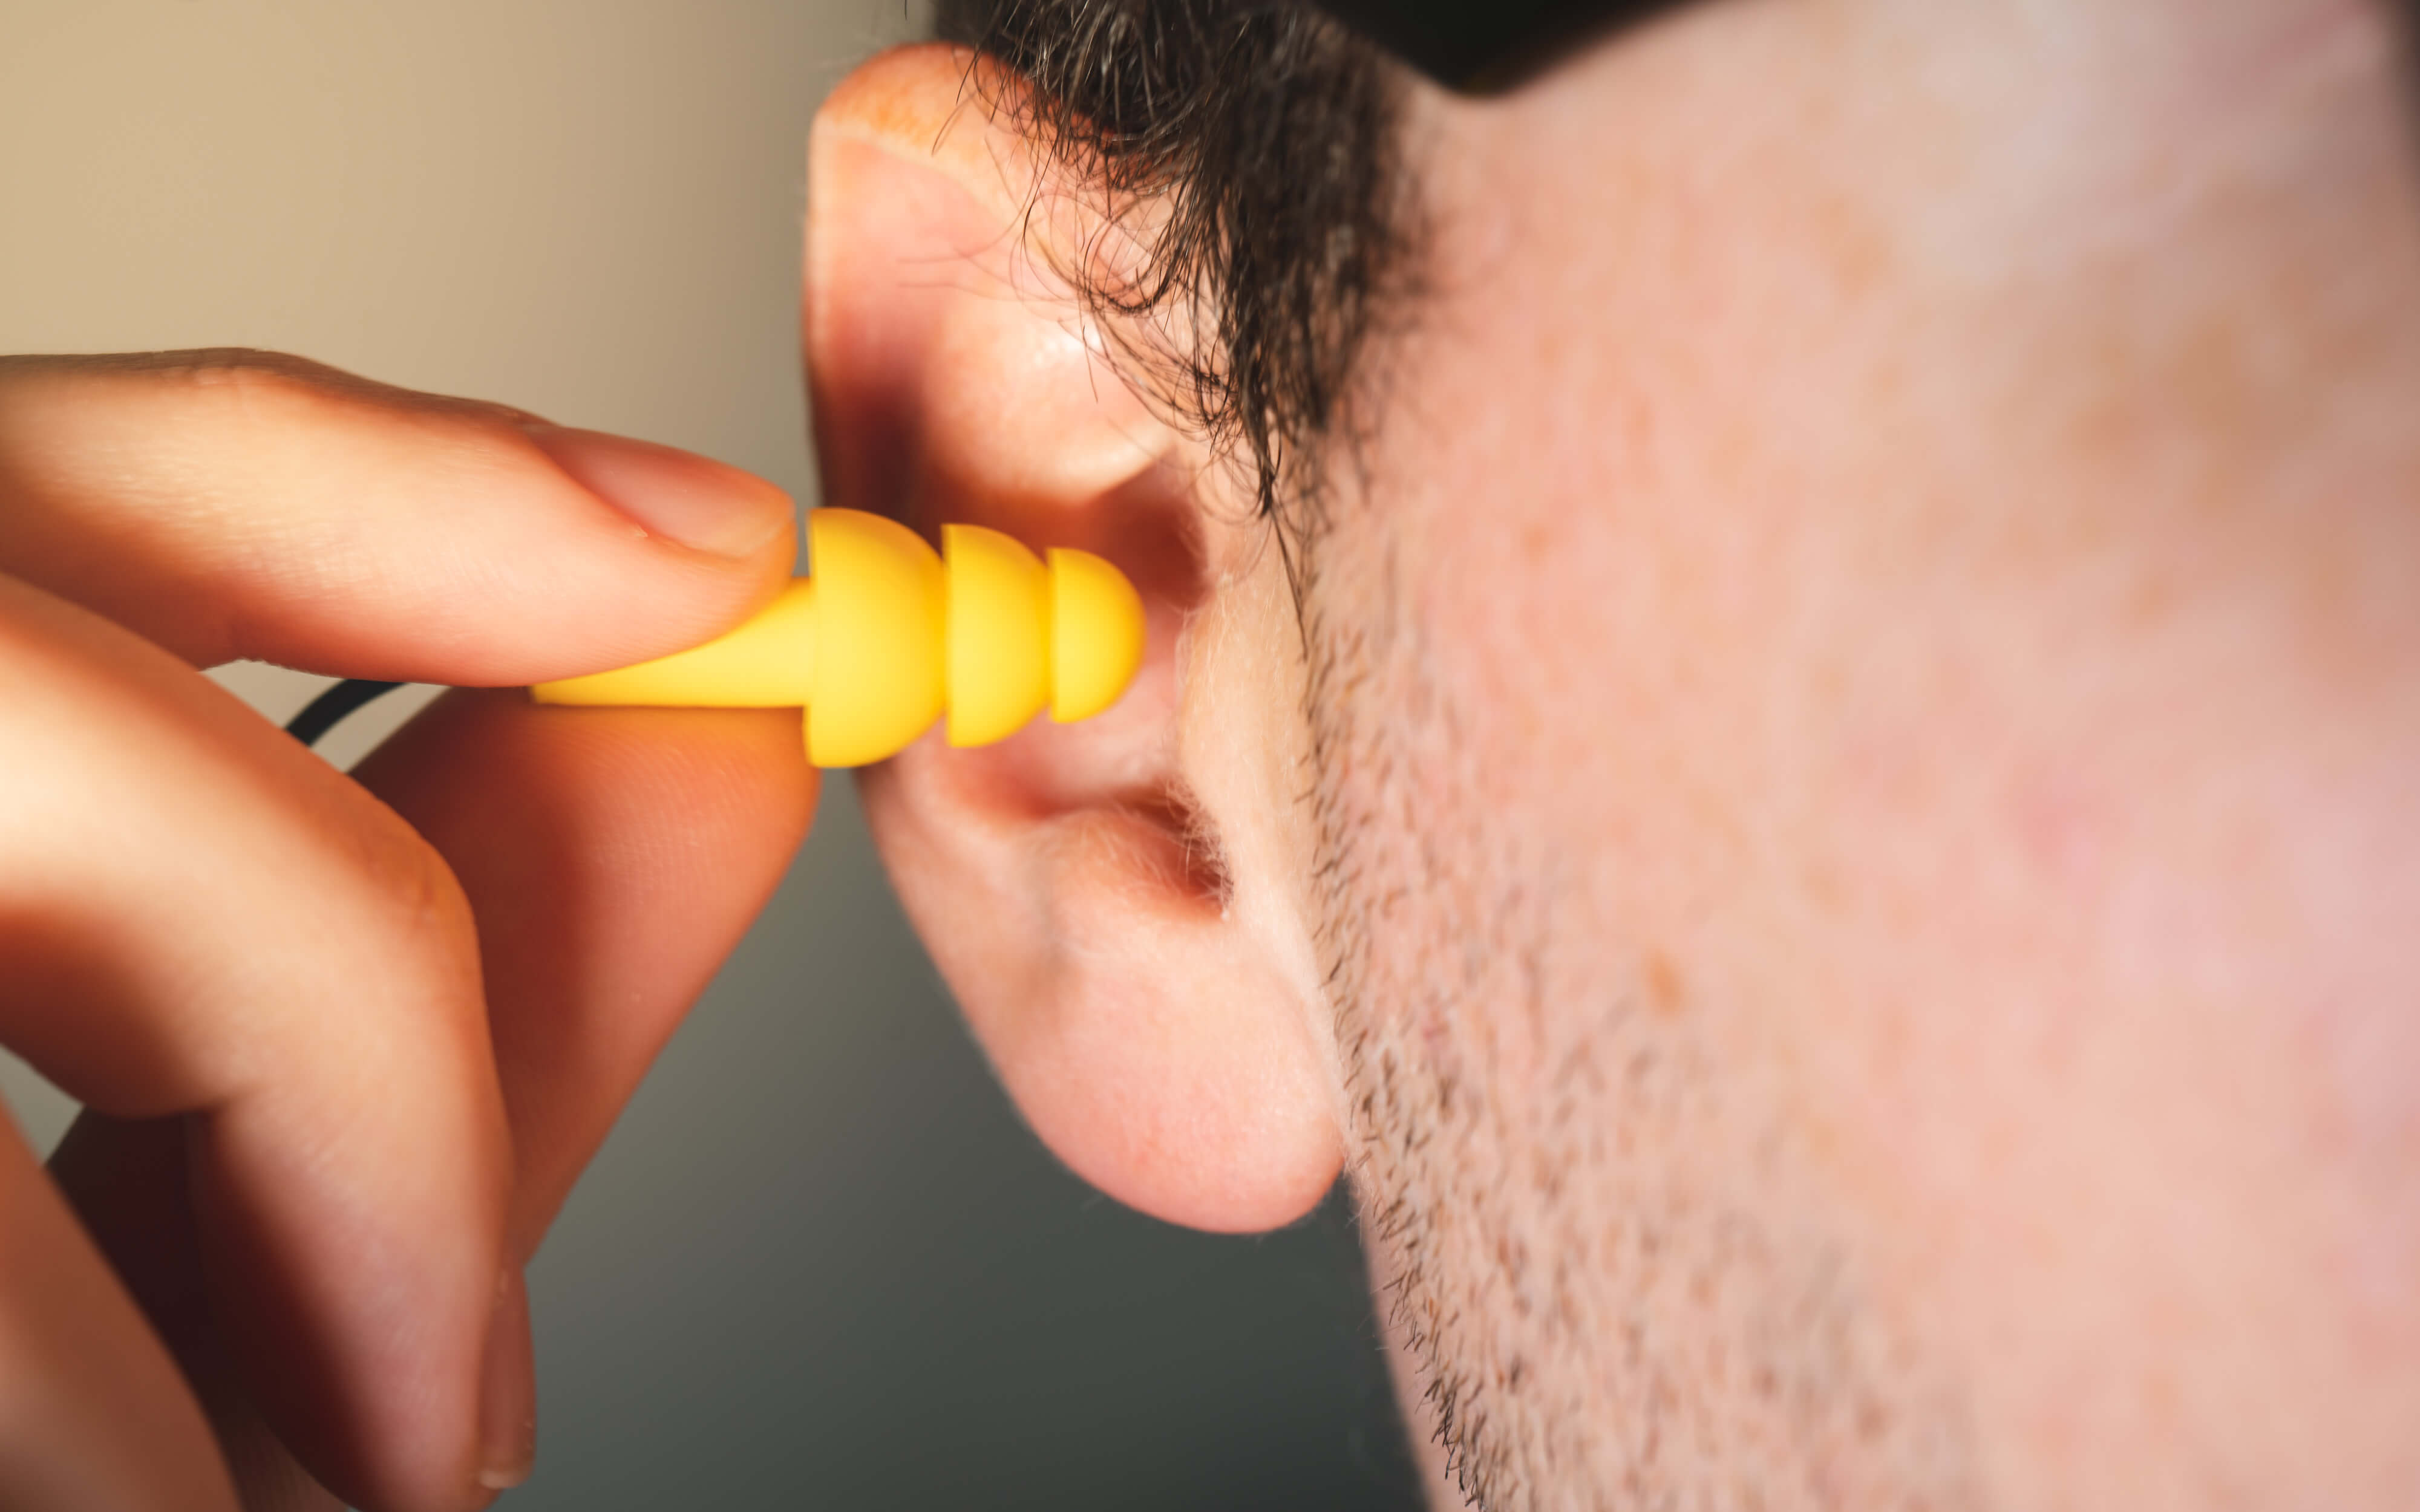 Sleeping with Earplugs: Benefits, Side Effects, Safety Tips, and Types